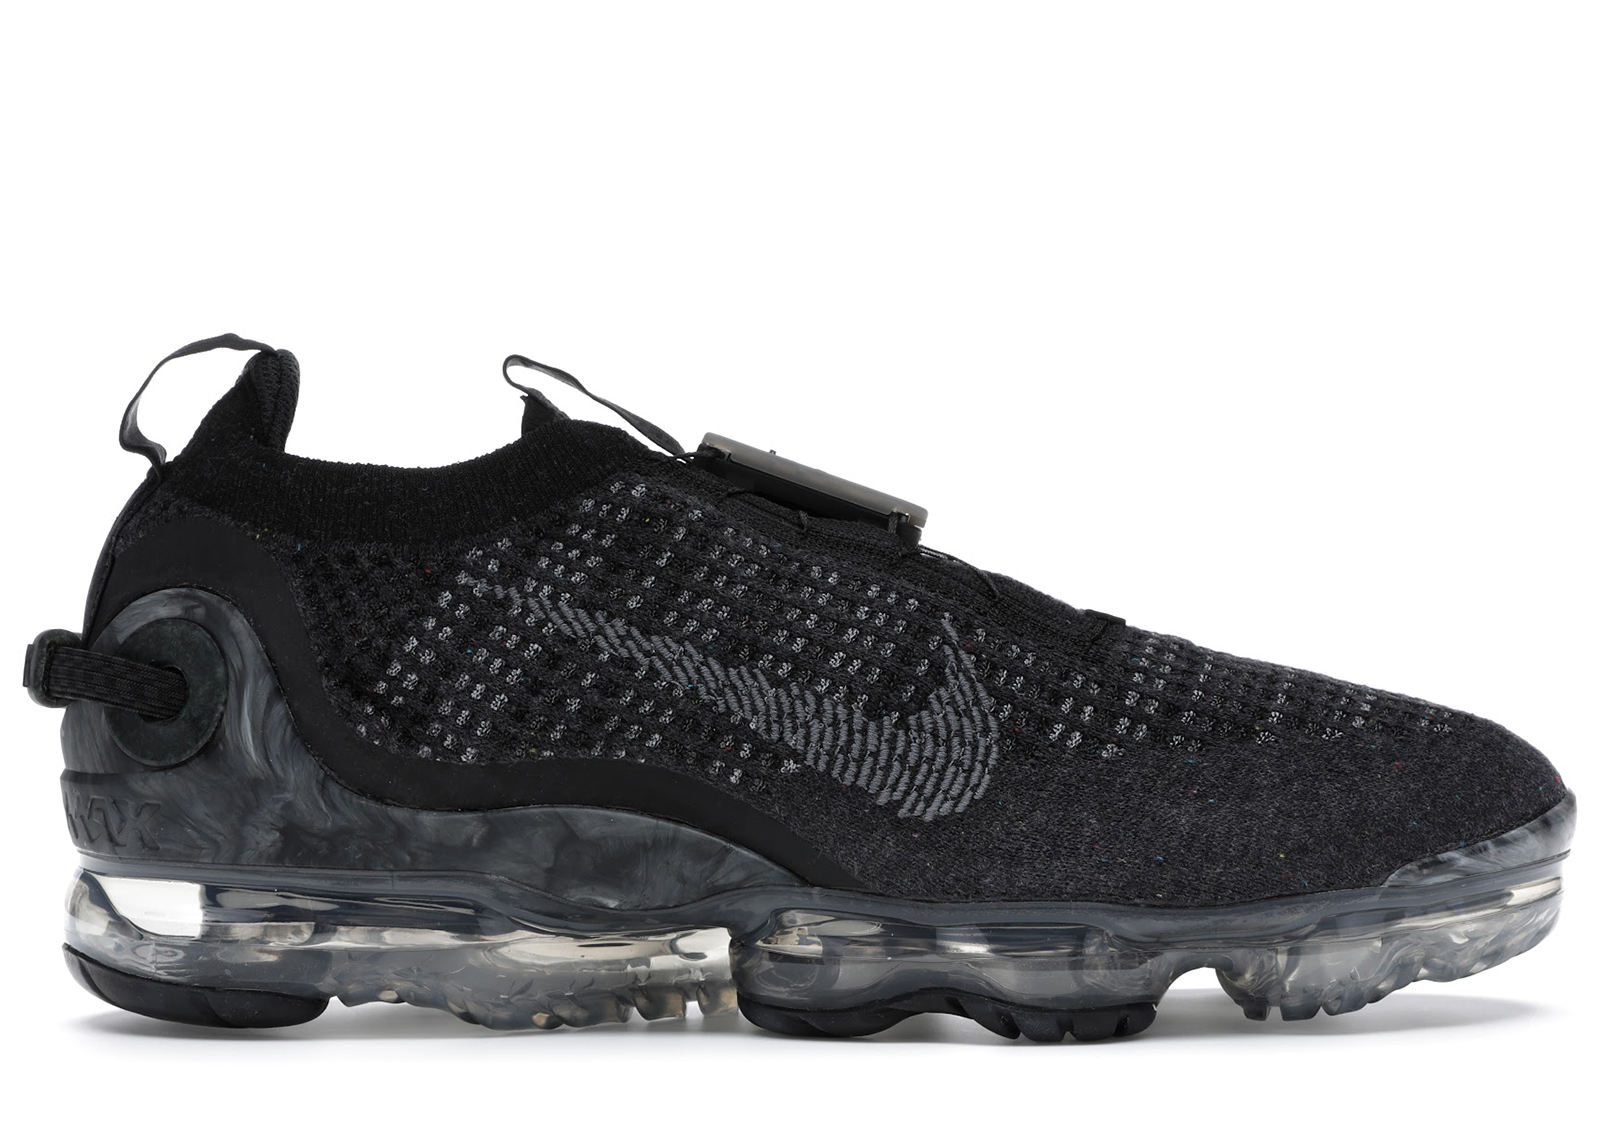 Buy Nike Air Max VaporMax Size 8 Shoes & New Sneakers - StockX